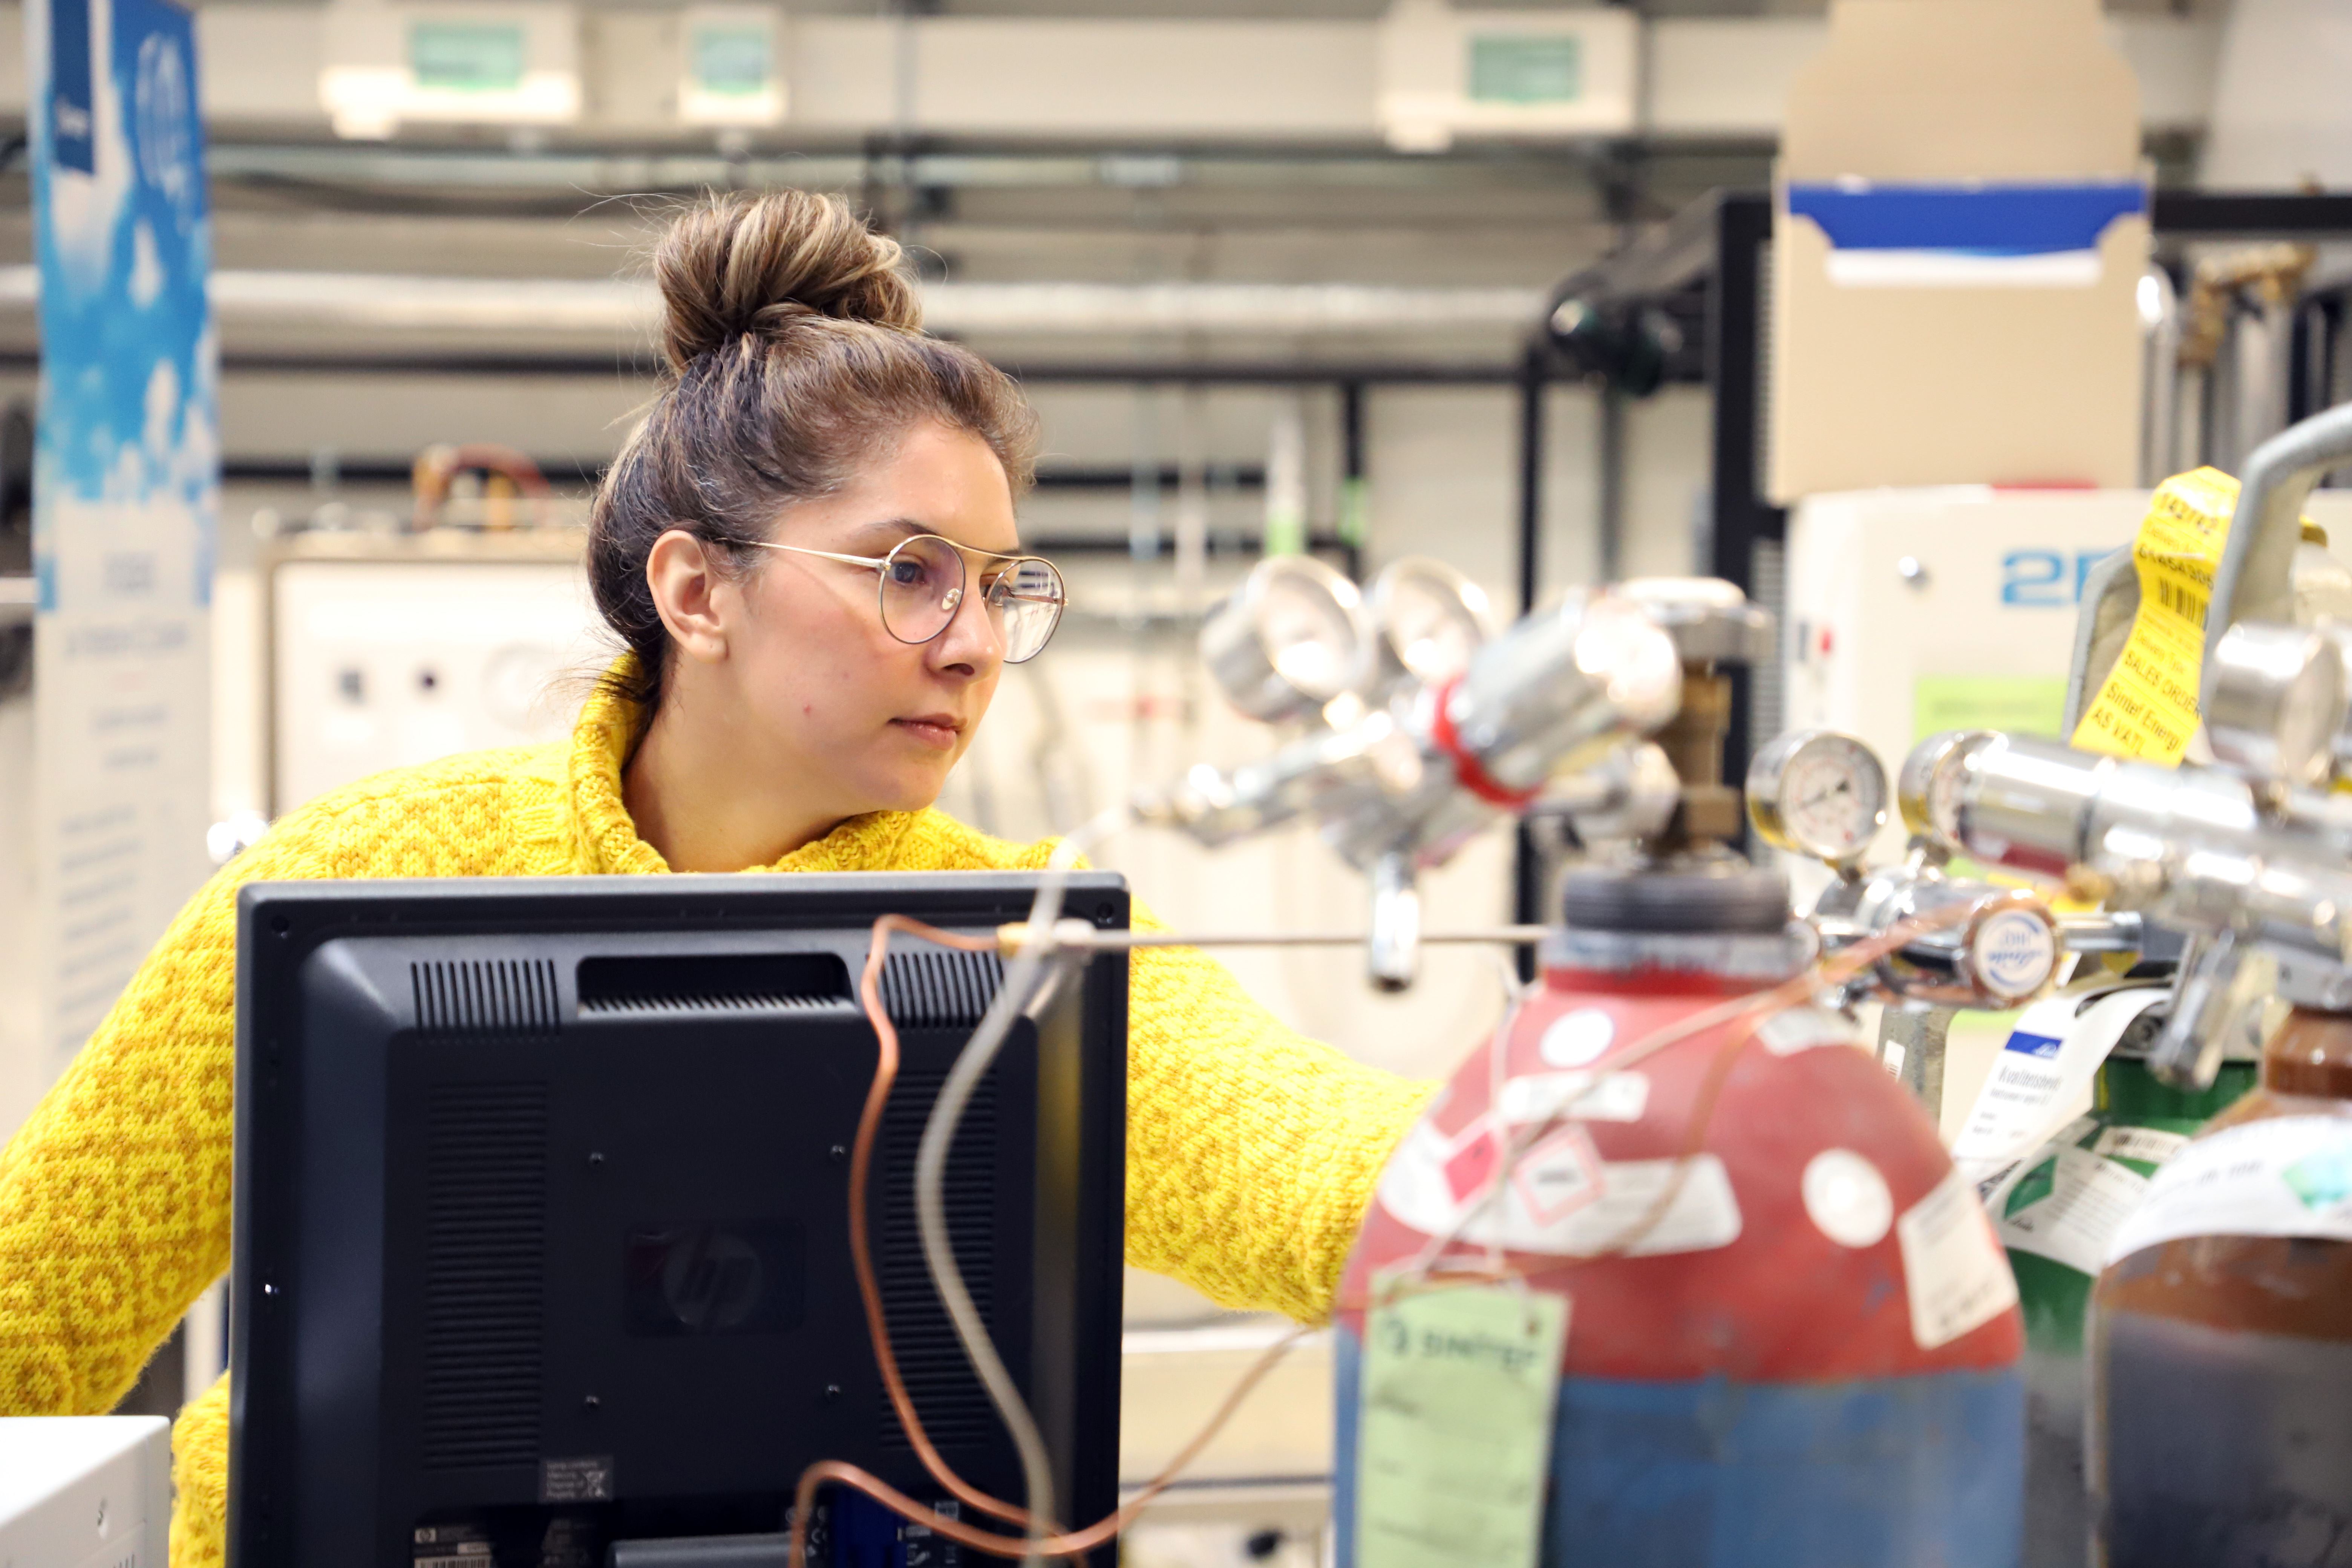 HighEFF research scientists are hard at work solving energy effi ciency challenges. Shown here: Yessica Alexandra Arellano Prieto (SINTEF).